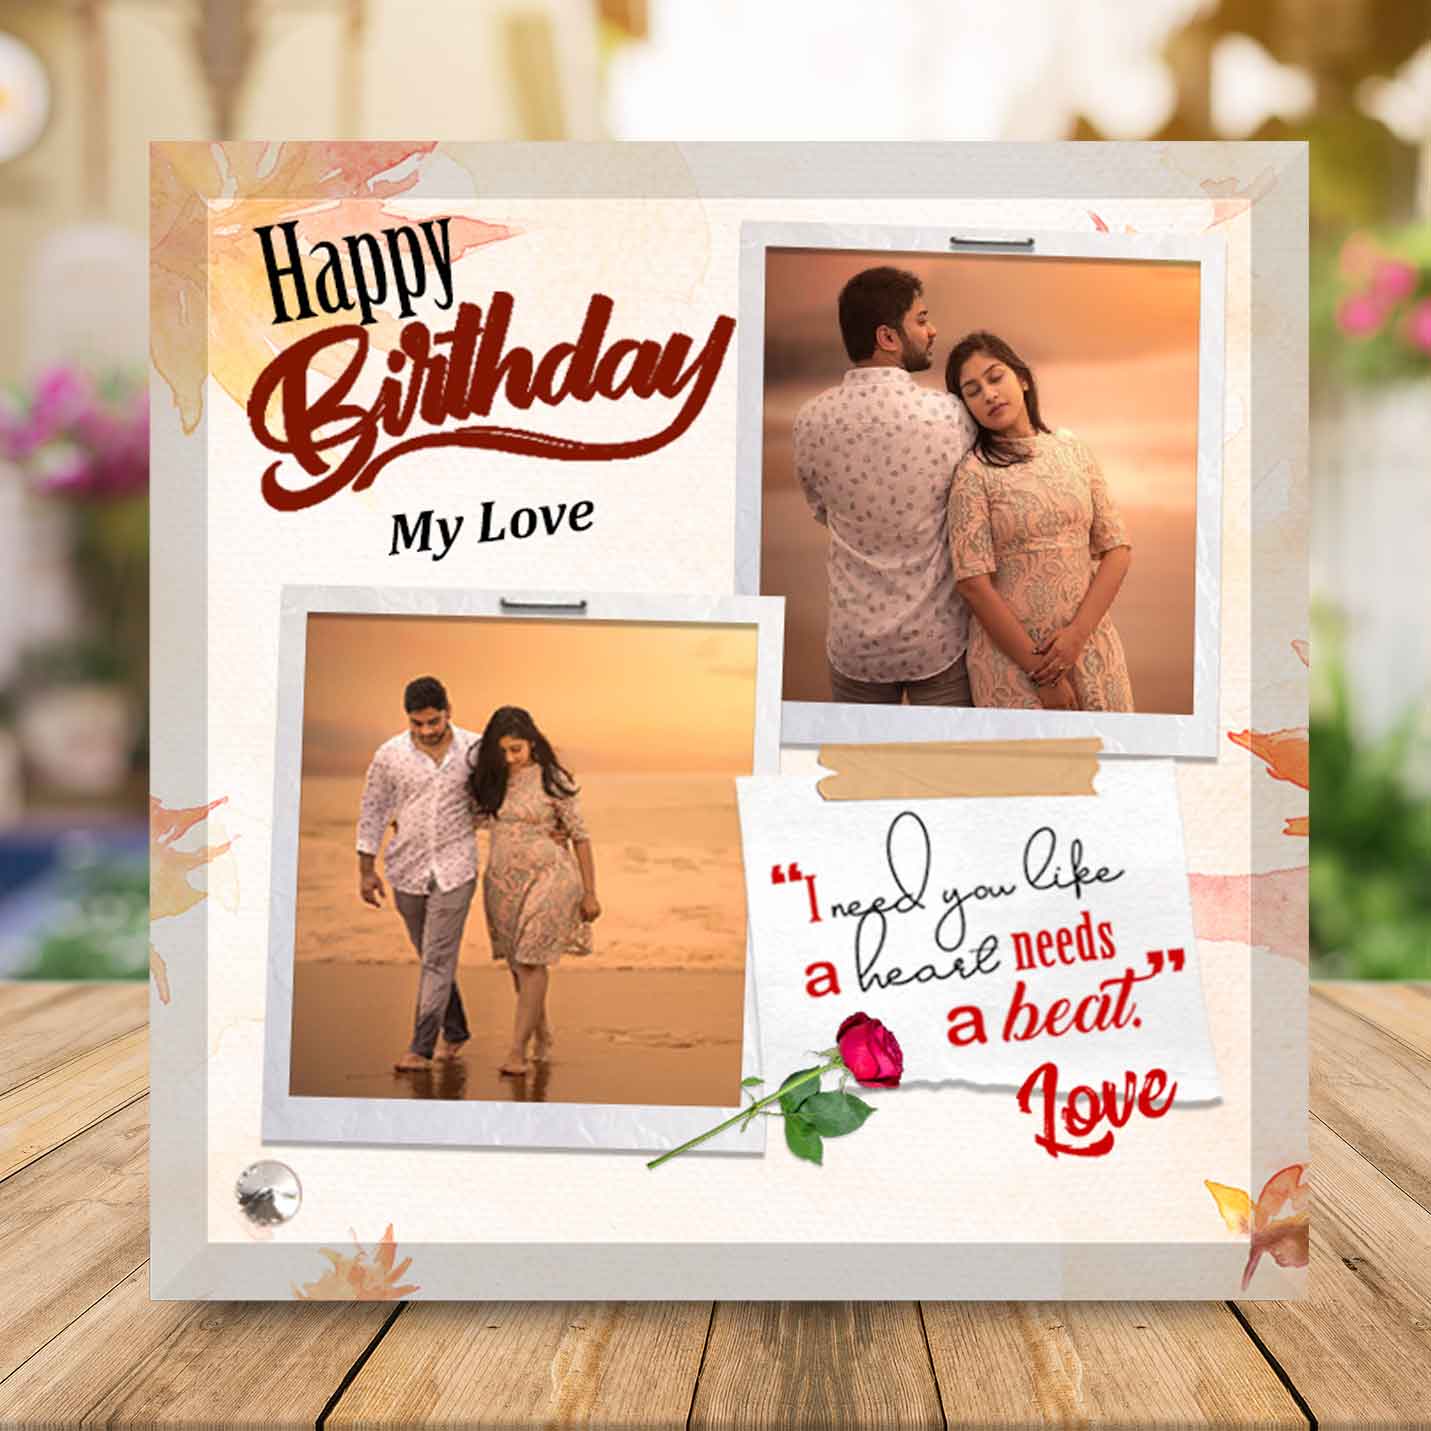 Buy Happy Birthday Gifts Online India | Unique Online Birthday Gifts For  Husband, Best Friend & Wife | Best / Good Birthday Gifts For Mom and Men  Online - Prestige Gifting Delights